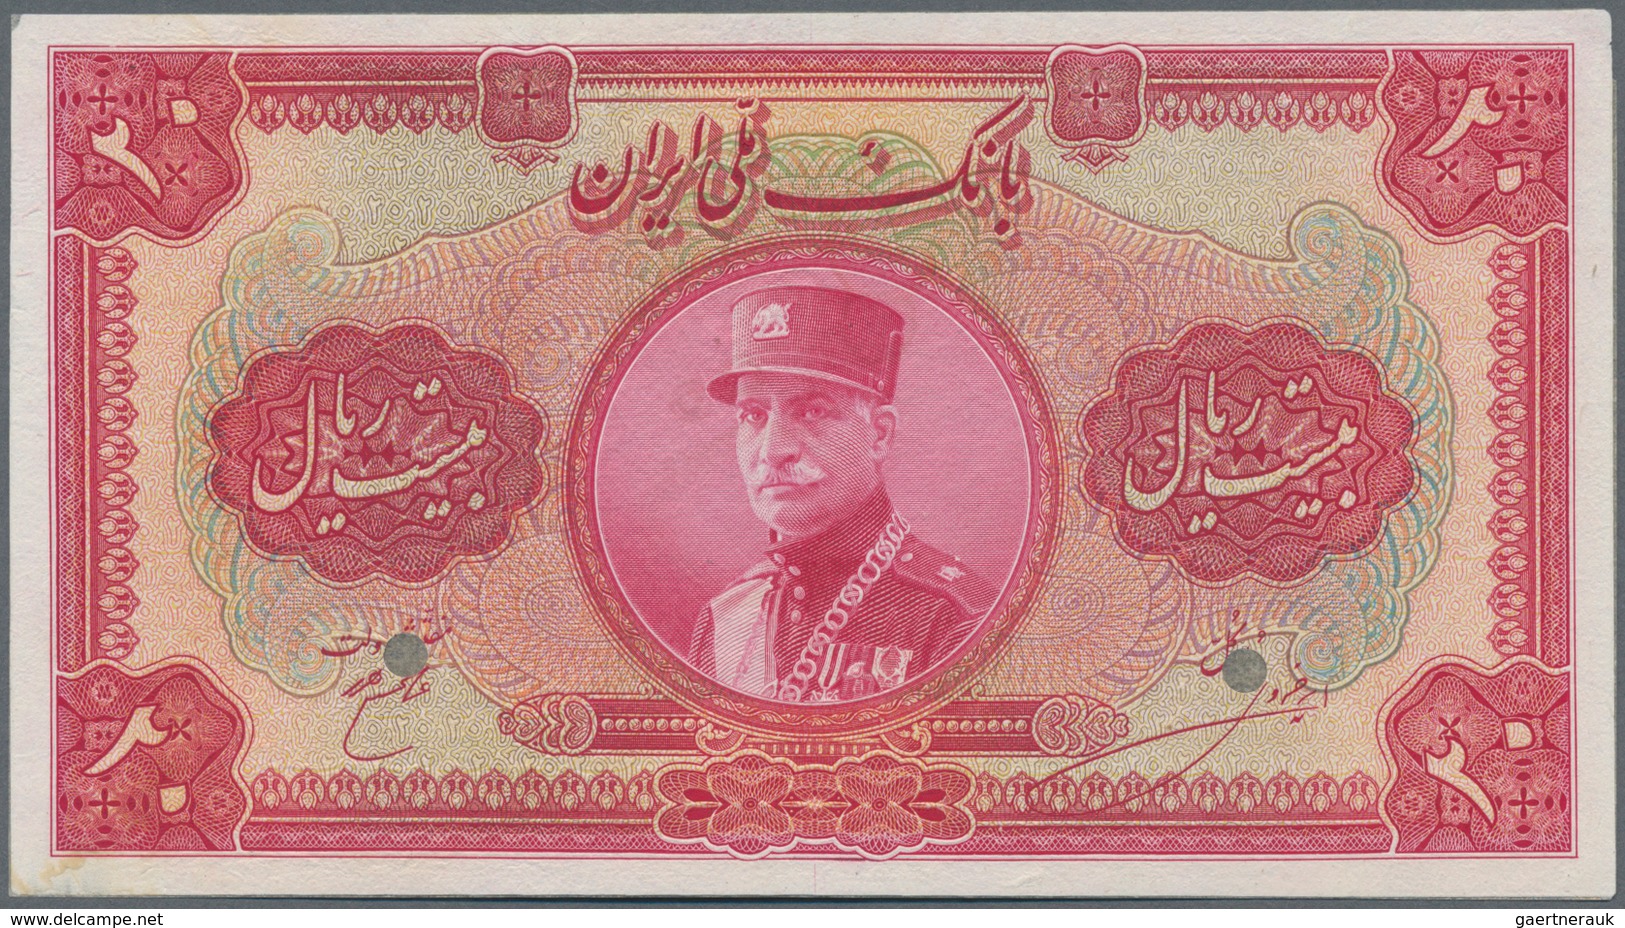 Iran: Uniface Front Proof Print Of 20 Rials ND P. 26p, Previously Mounted With Glue Residual On Back - Irán